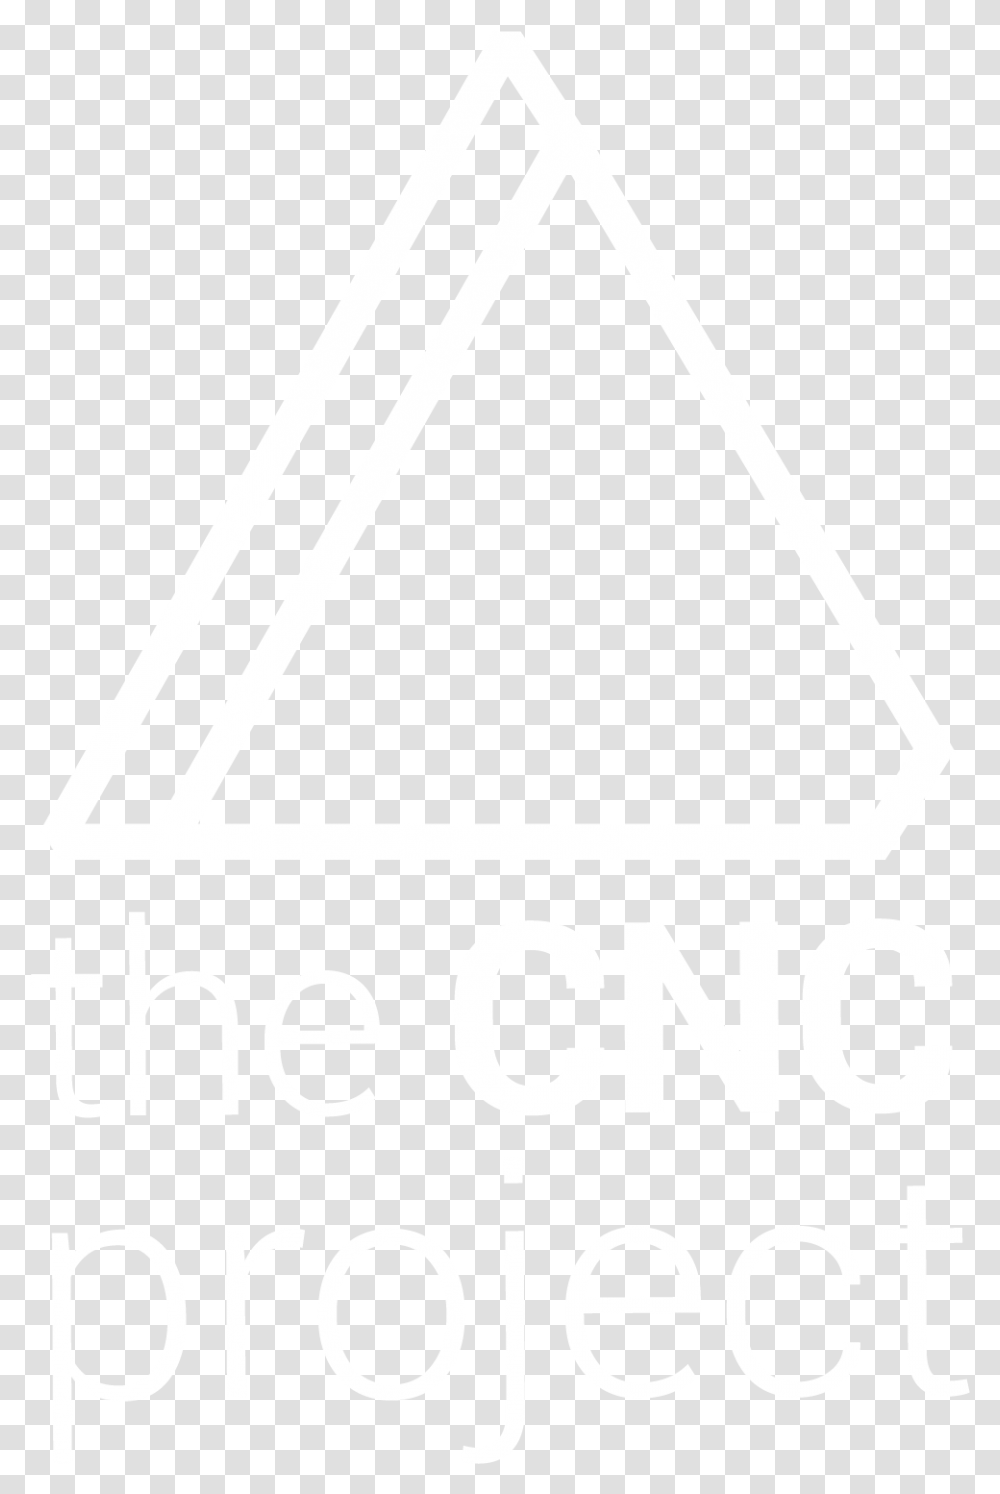 Design Fabrication And Cnc Cutting Dot, Triangle, Text, Symbol, Label Transparent Png